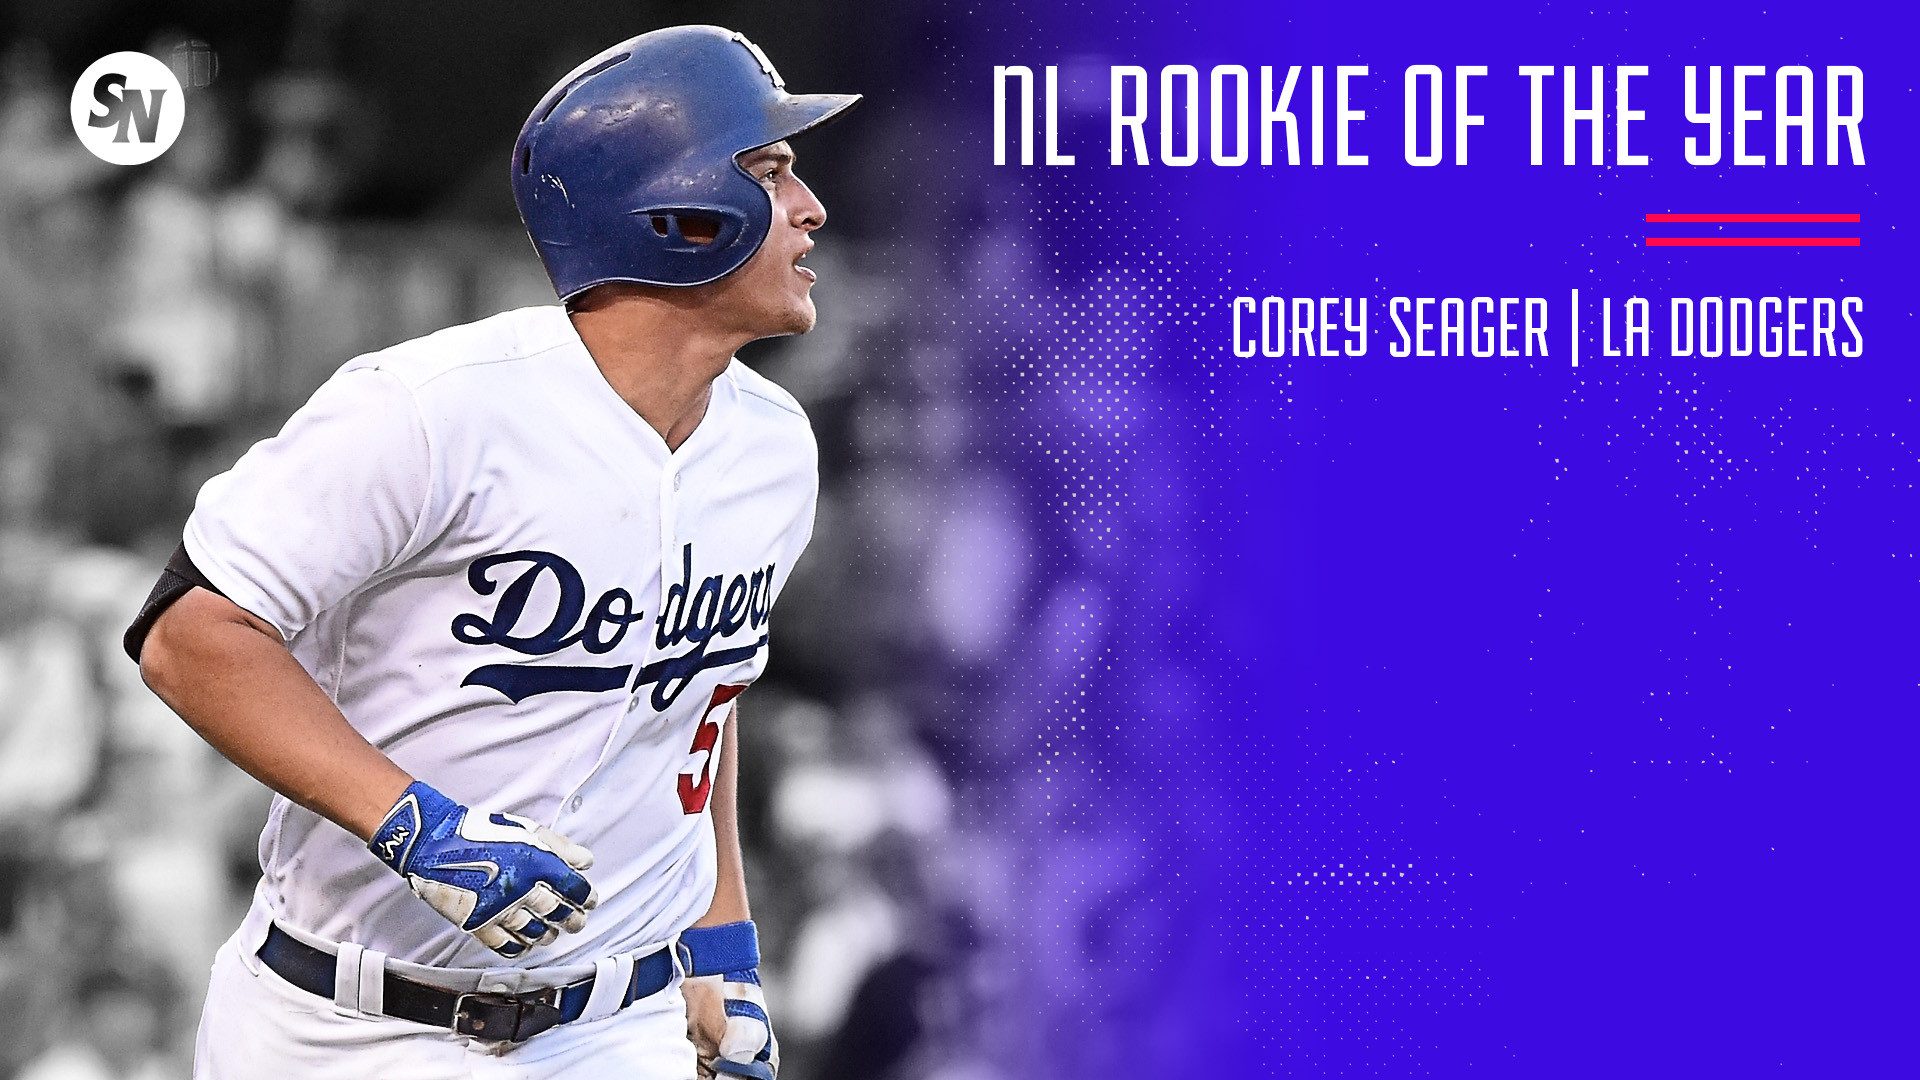 Dodgers Ss Corey Seager Wins Sporting News Nl Rookie Of The Year